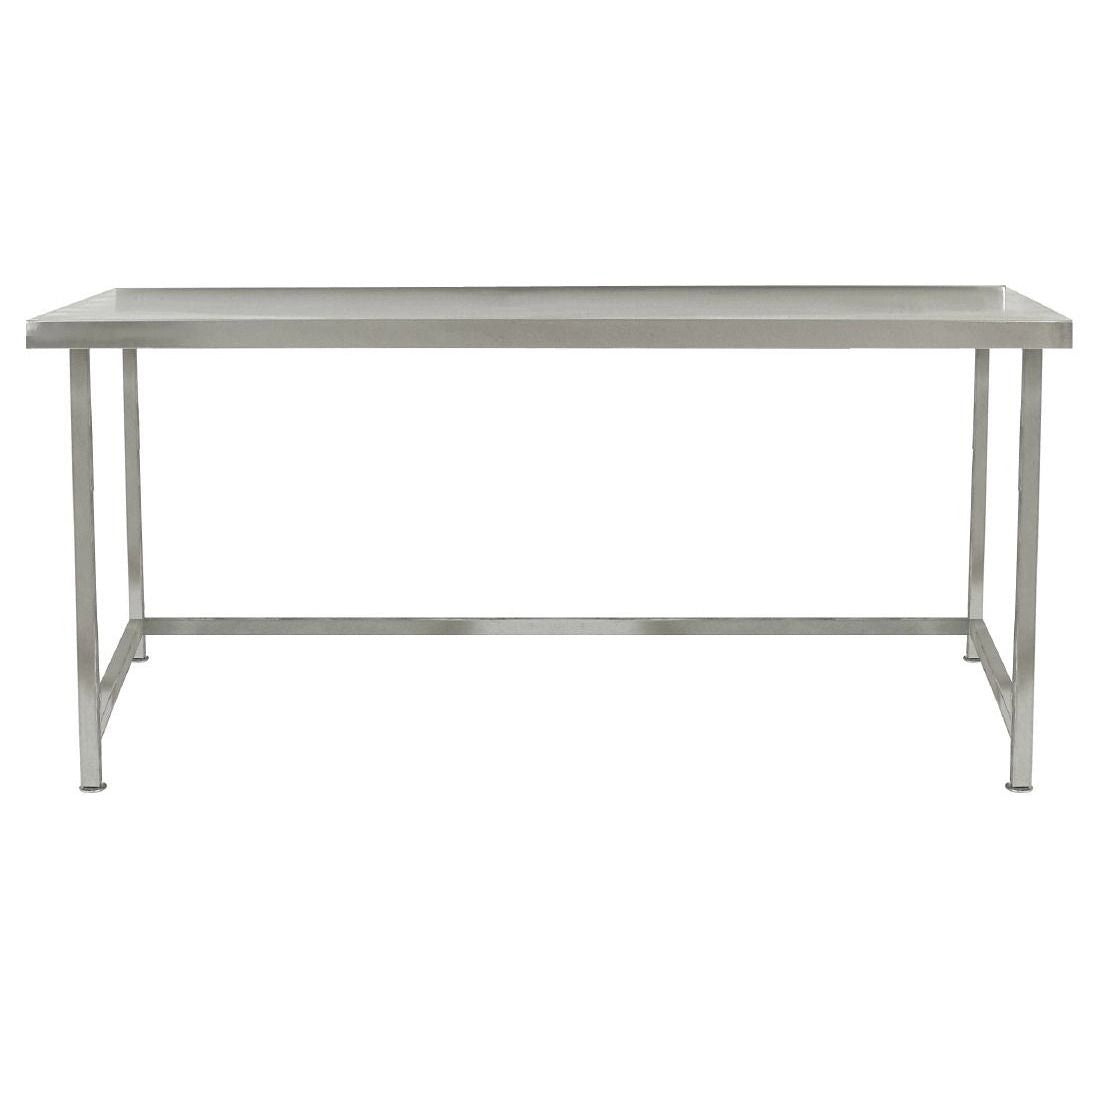 Parry Fully Welded Stainless Steel Centre Table 1800x600mm - DC607